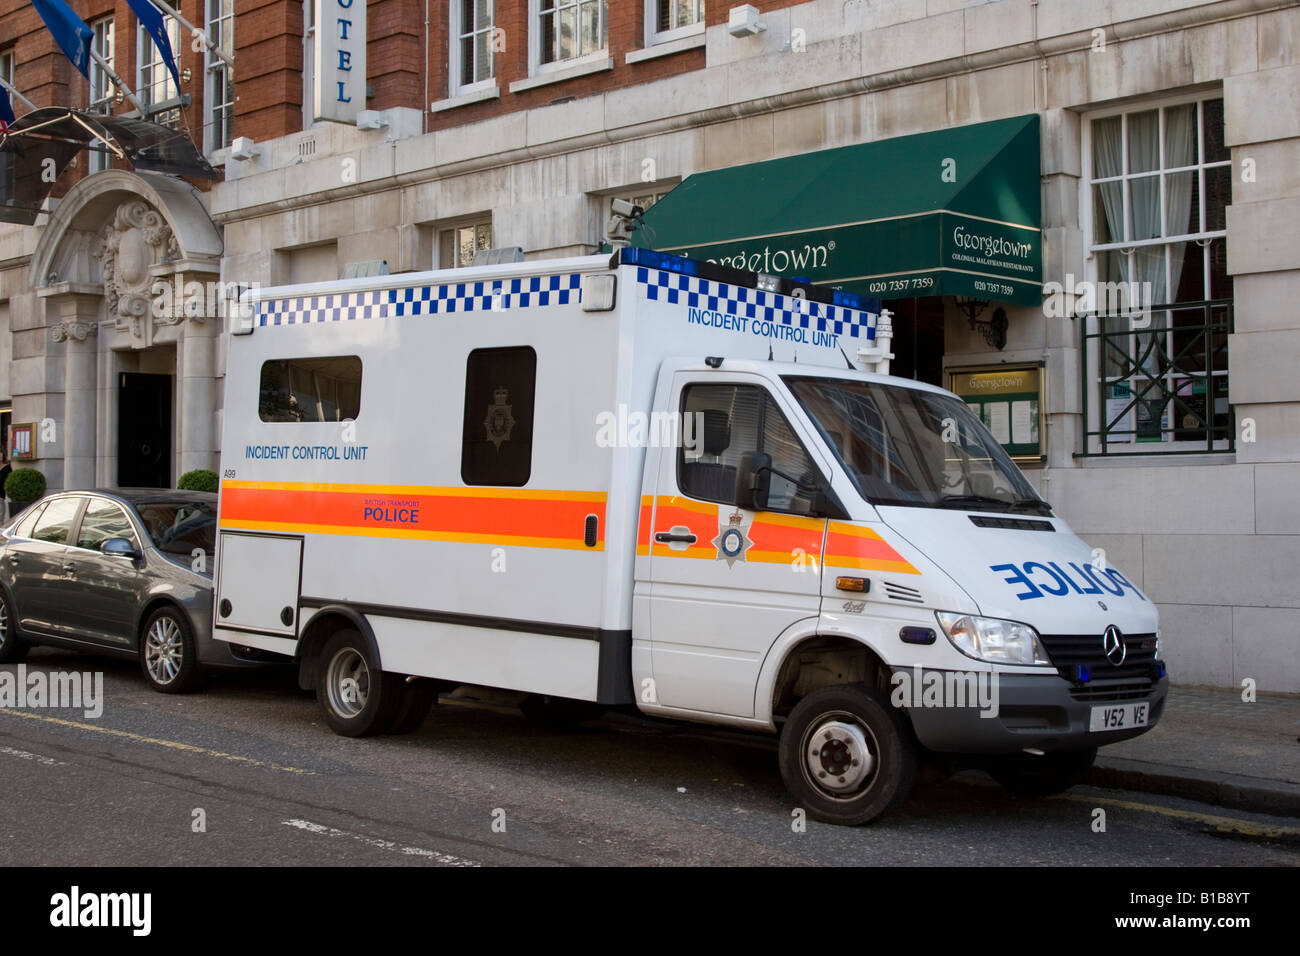 British Transport Police, Incident Control Unit, Central London Stock Photo